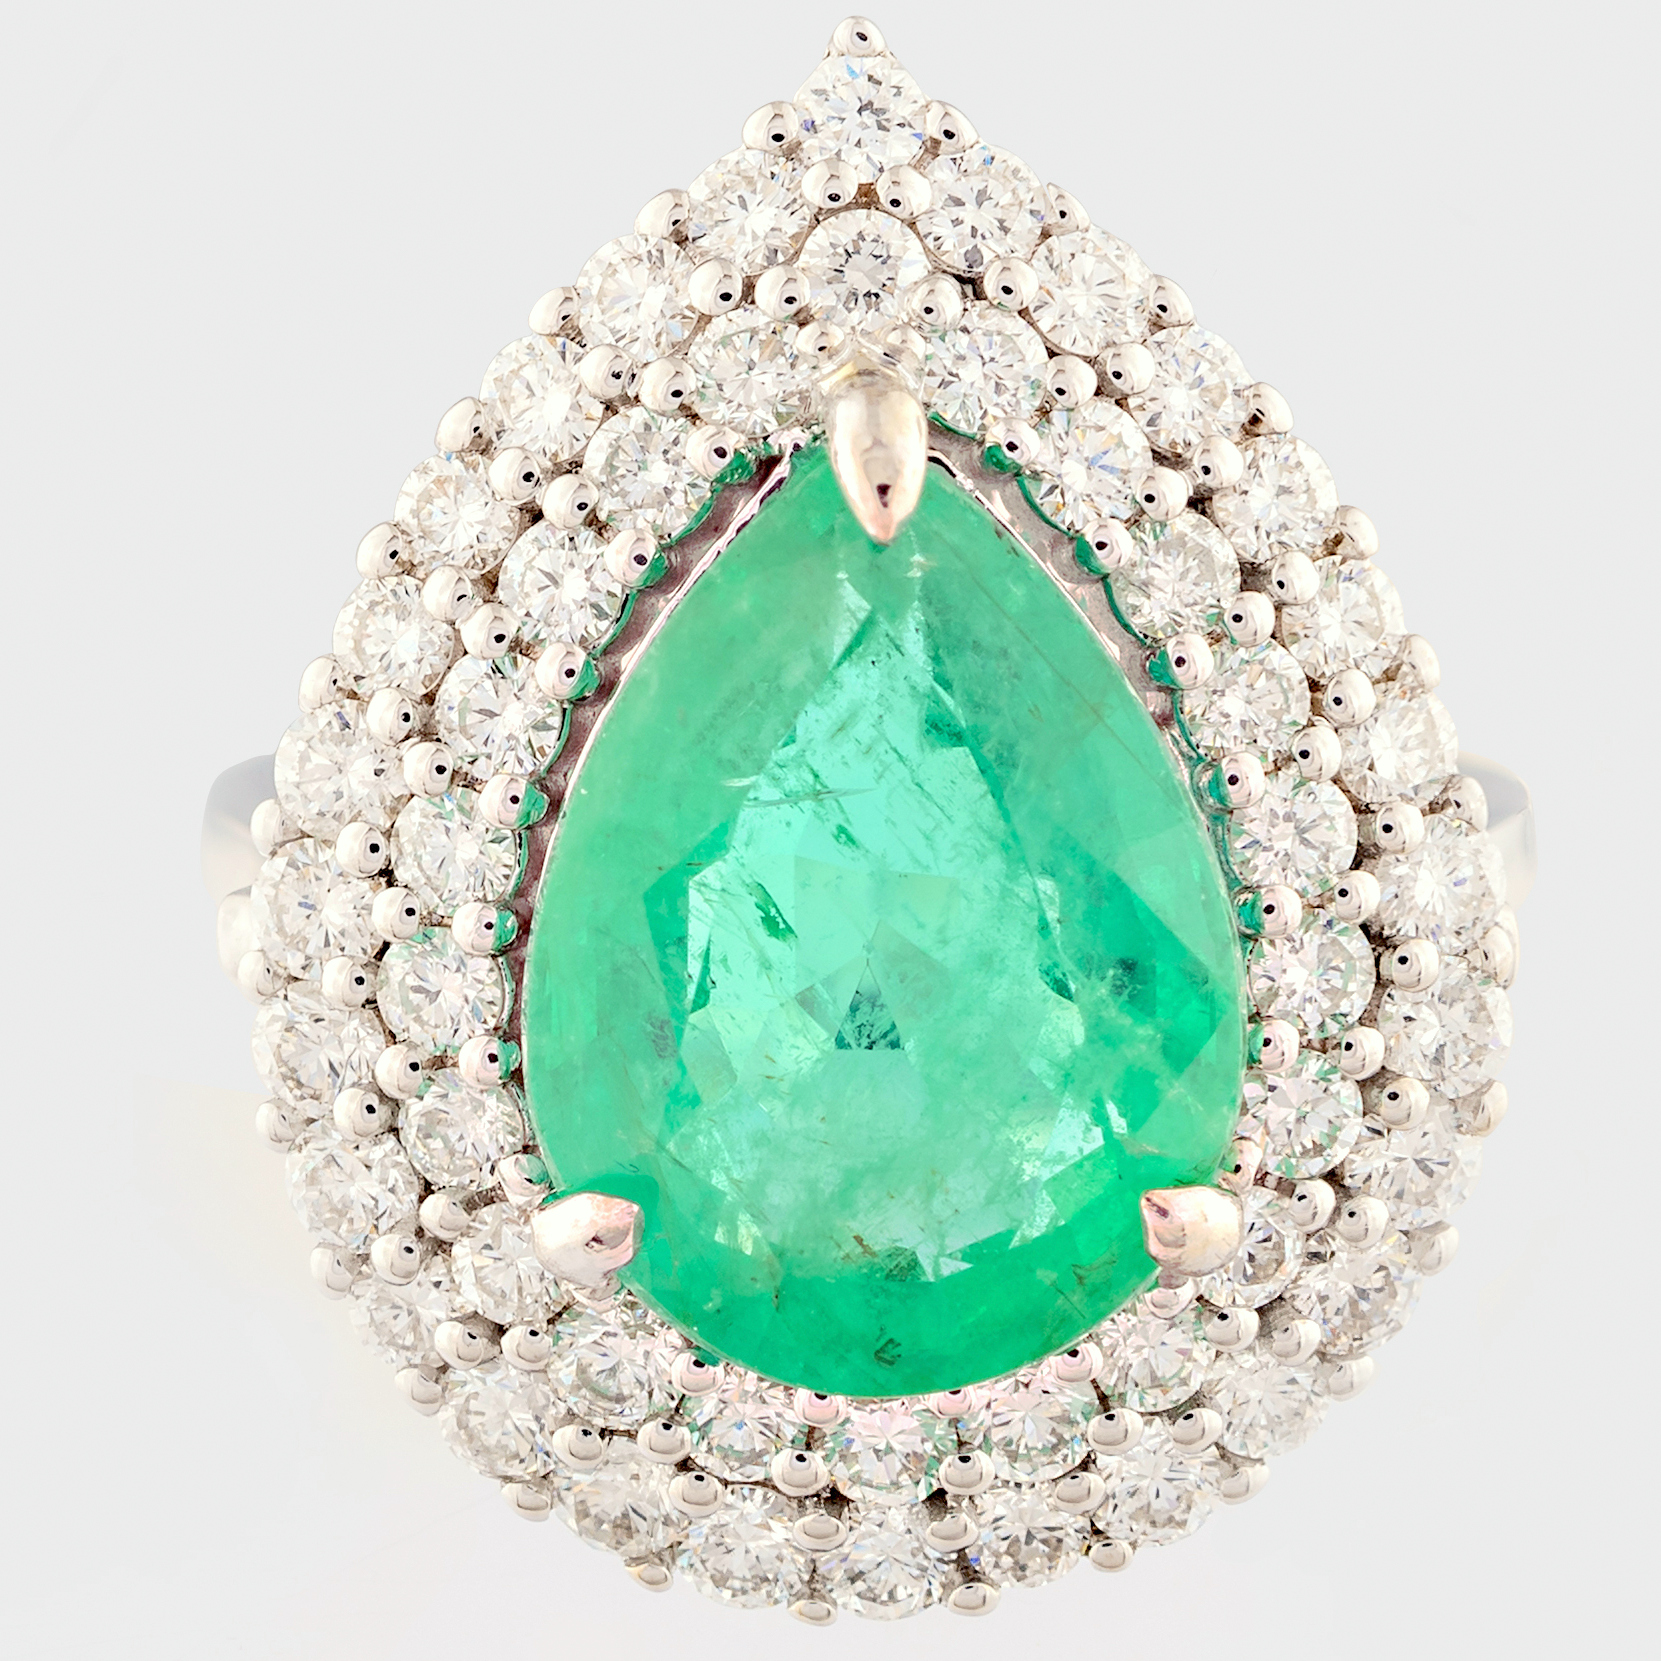 14K White Gold Cluster Ring 4,70 ct Natural Emerald - 1,40 ct Diamond - Image 2 of 4